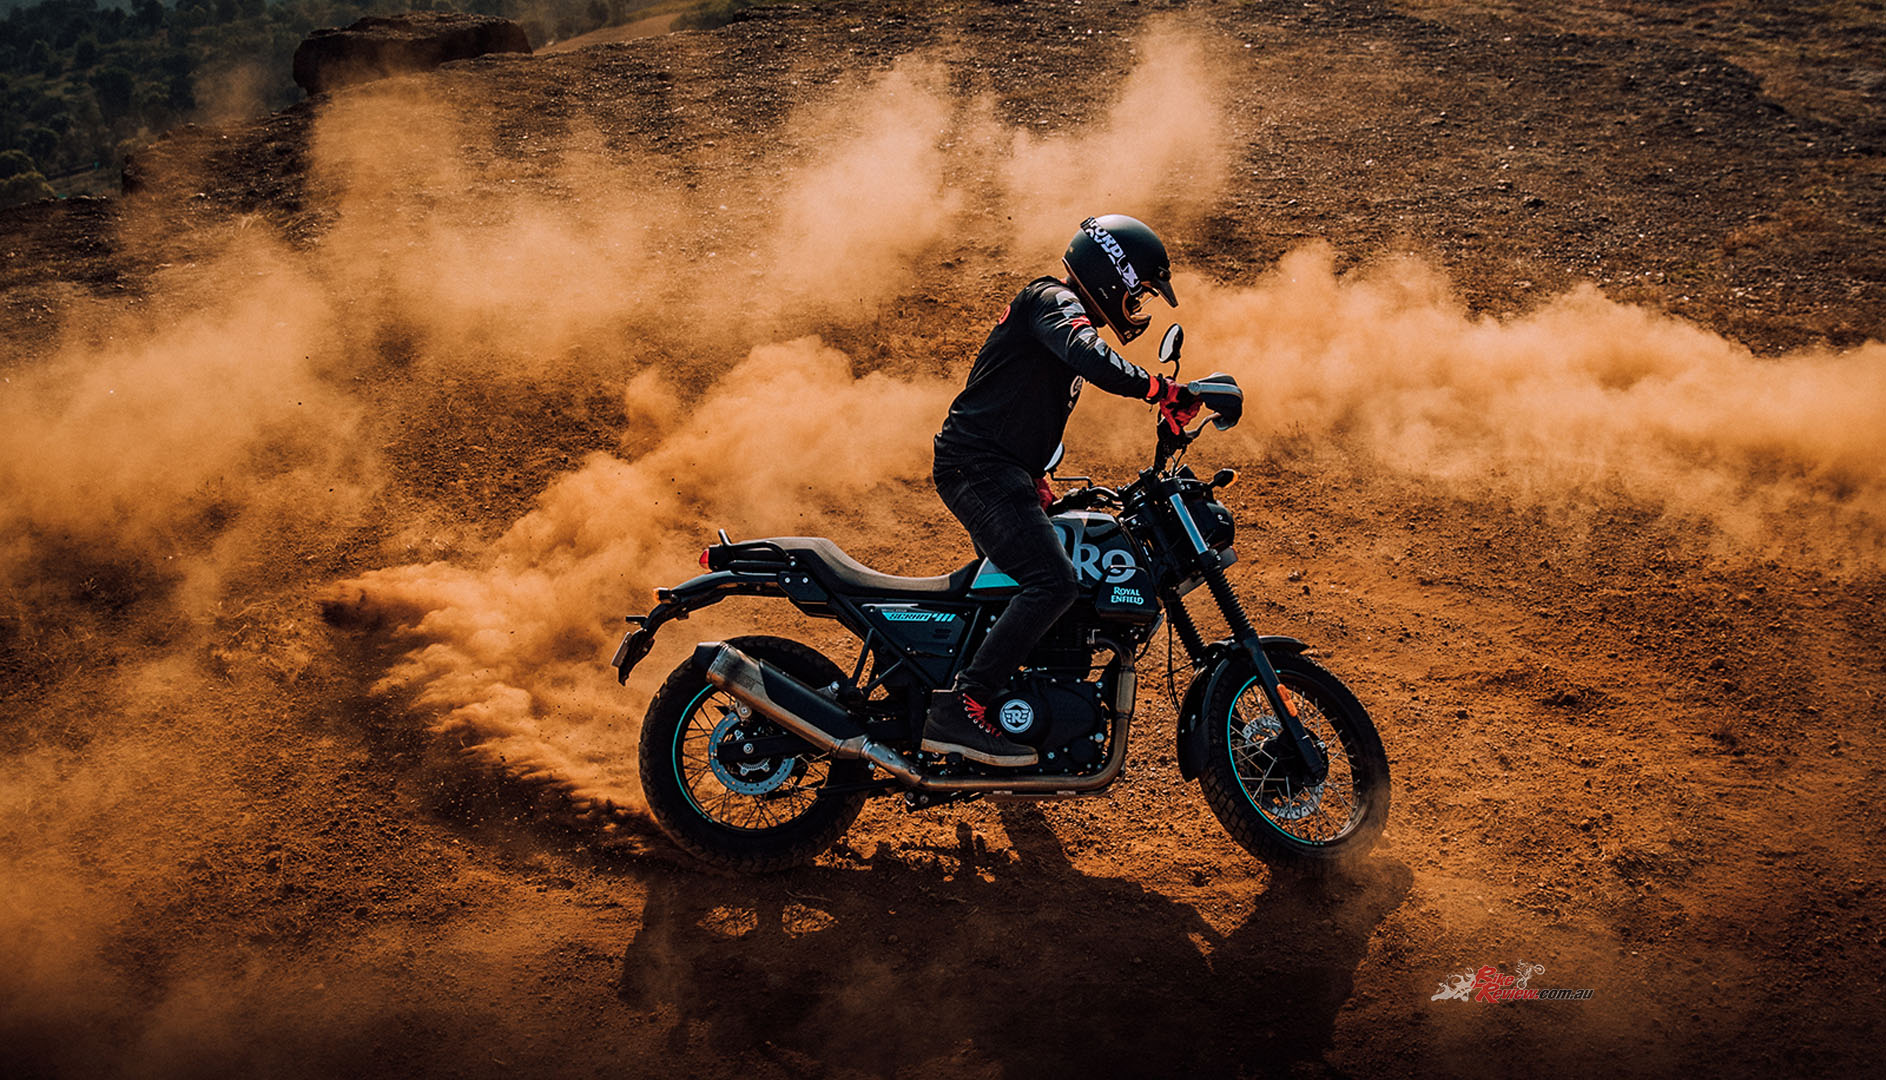 RE say the new Scram 411 is an engaging, accessible and capable street scrambler, with the heart of an adventure motorcycle.